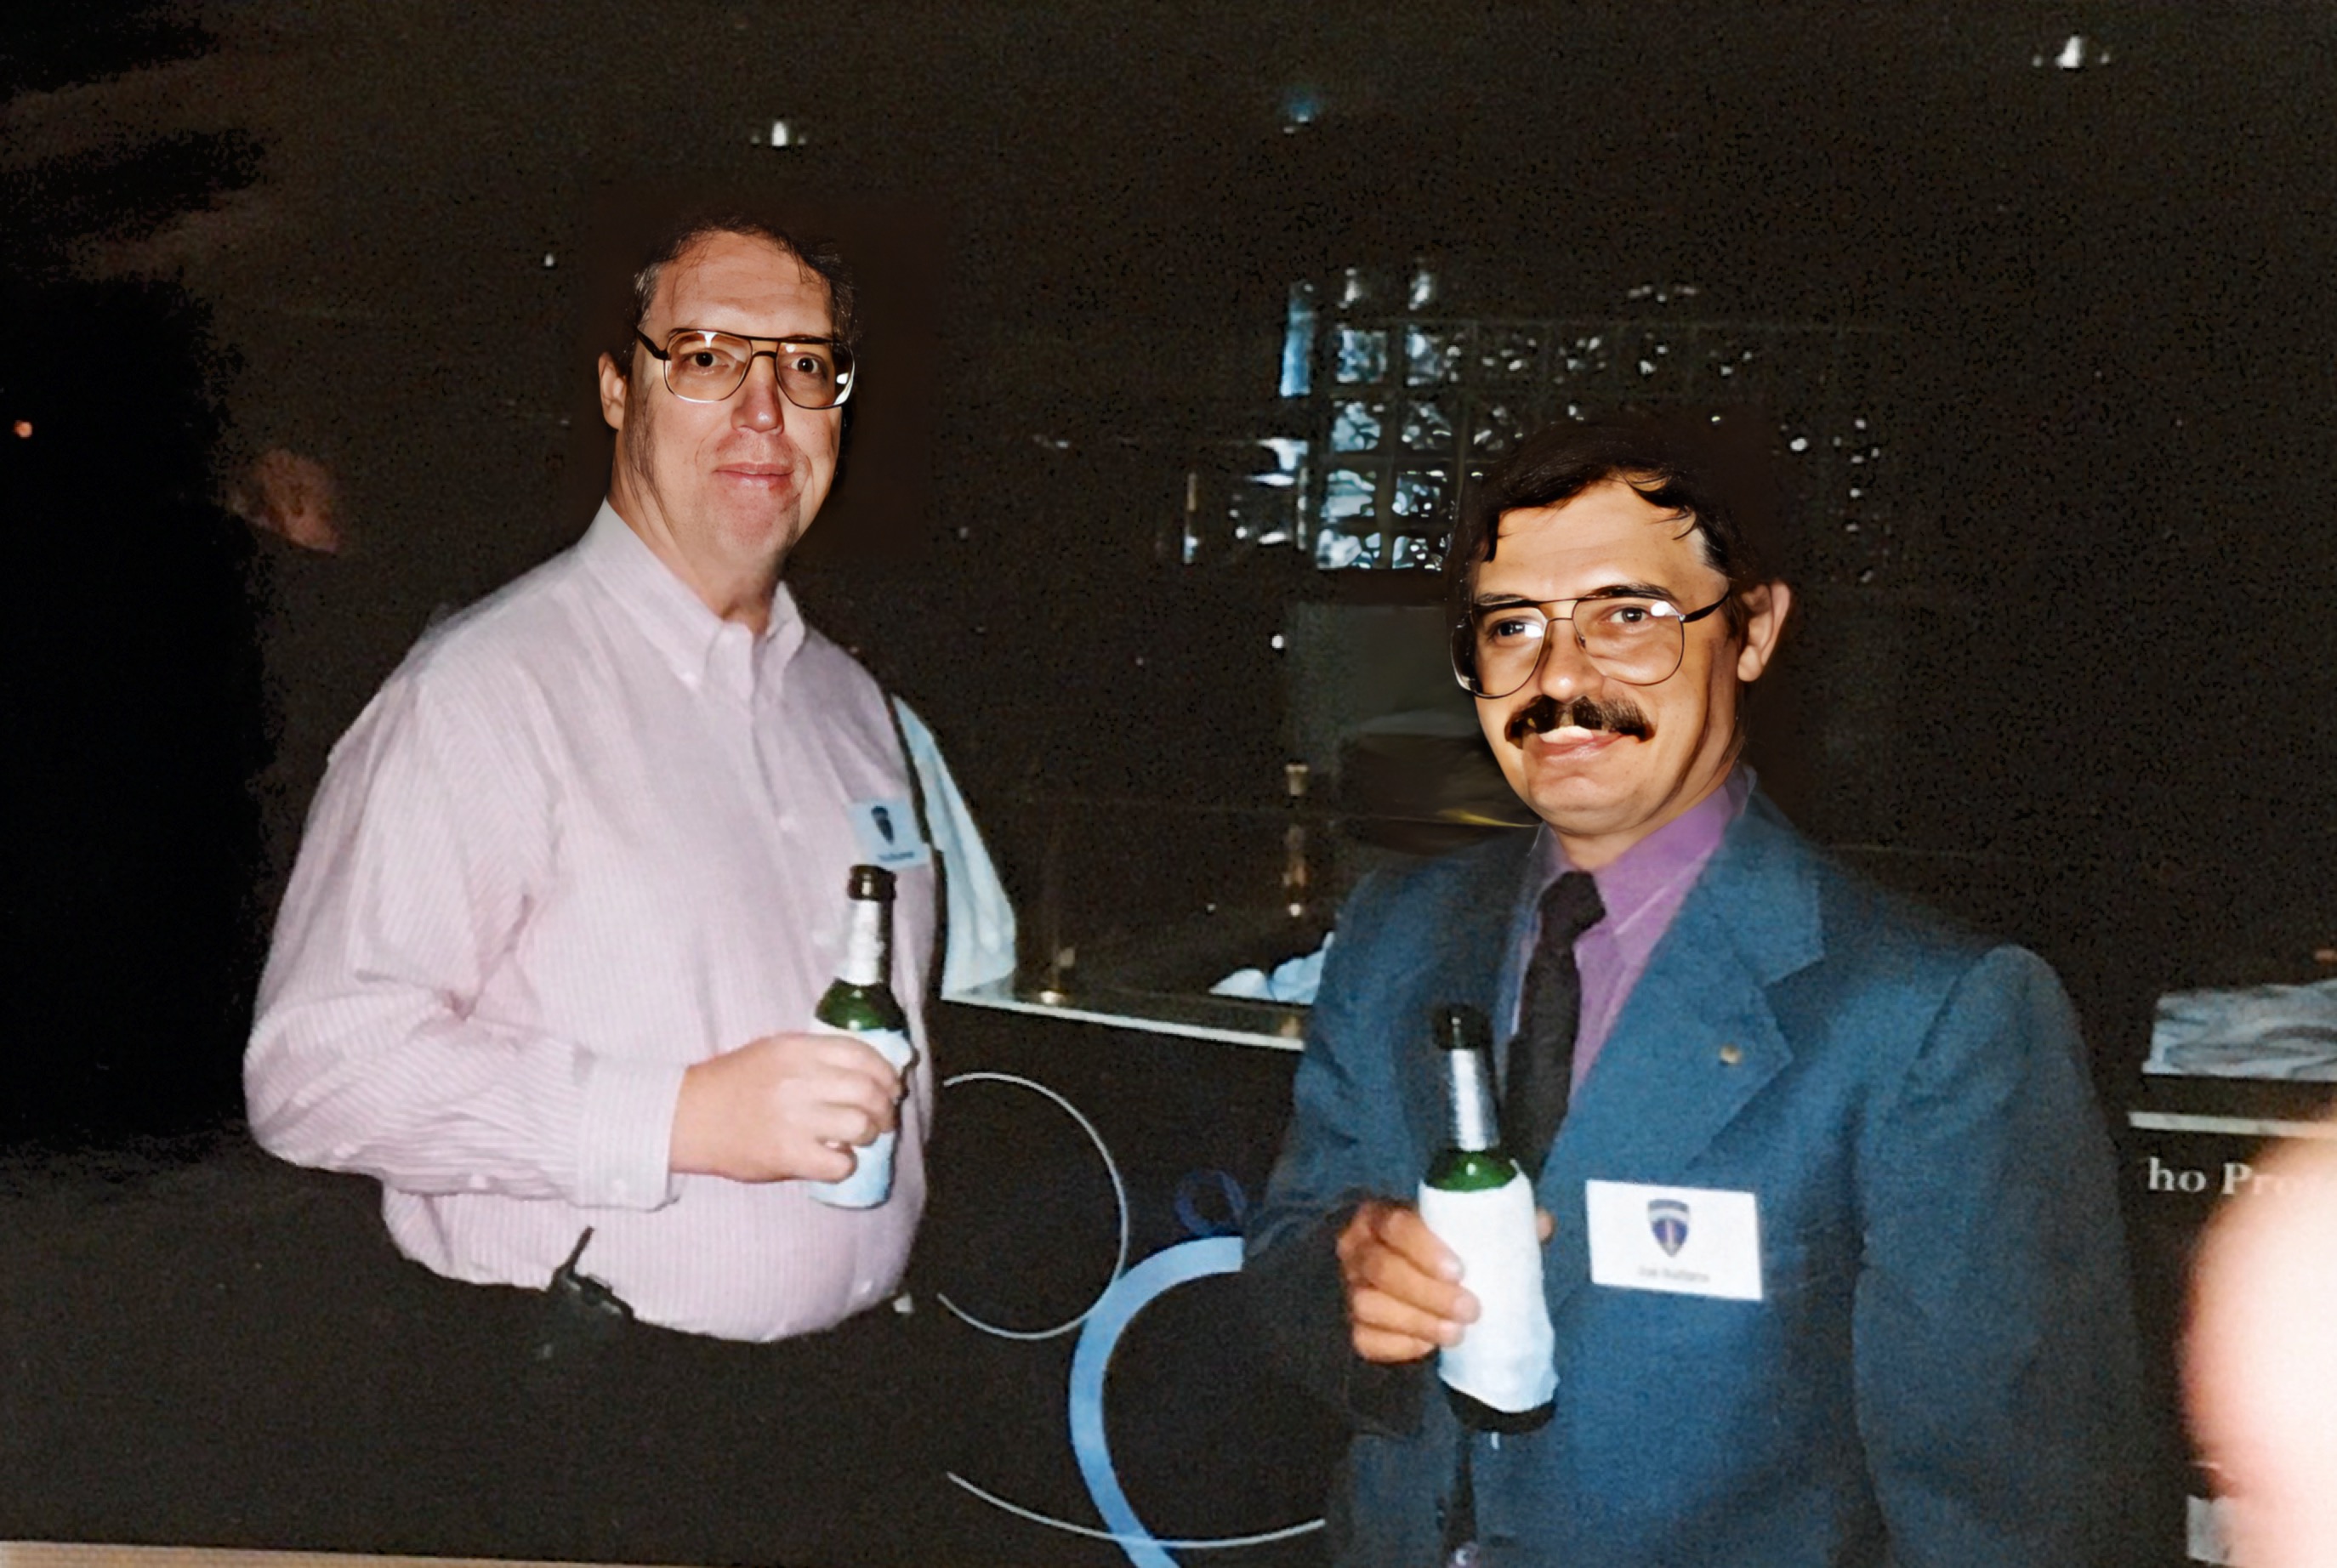 At the FSB reunion in D.C. 2002